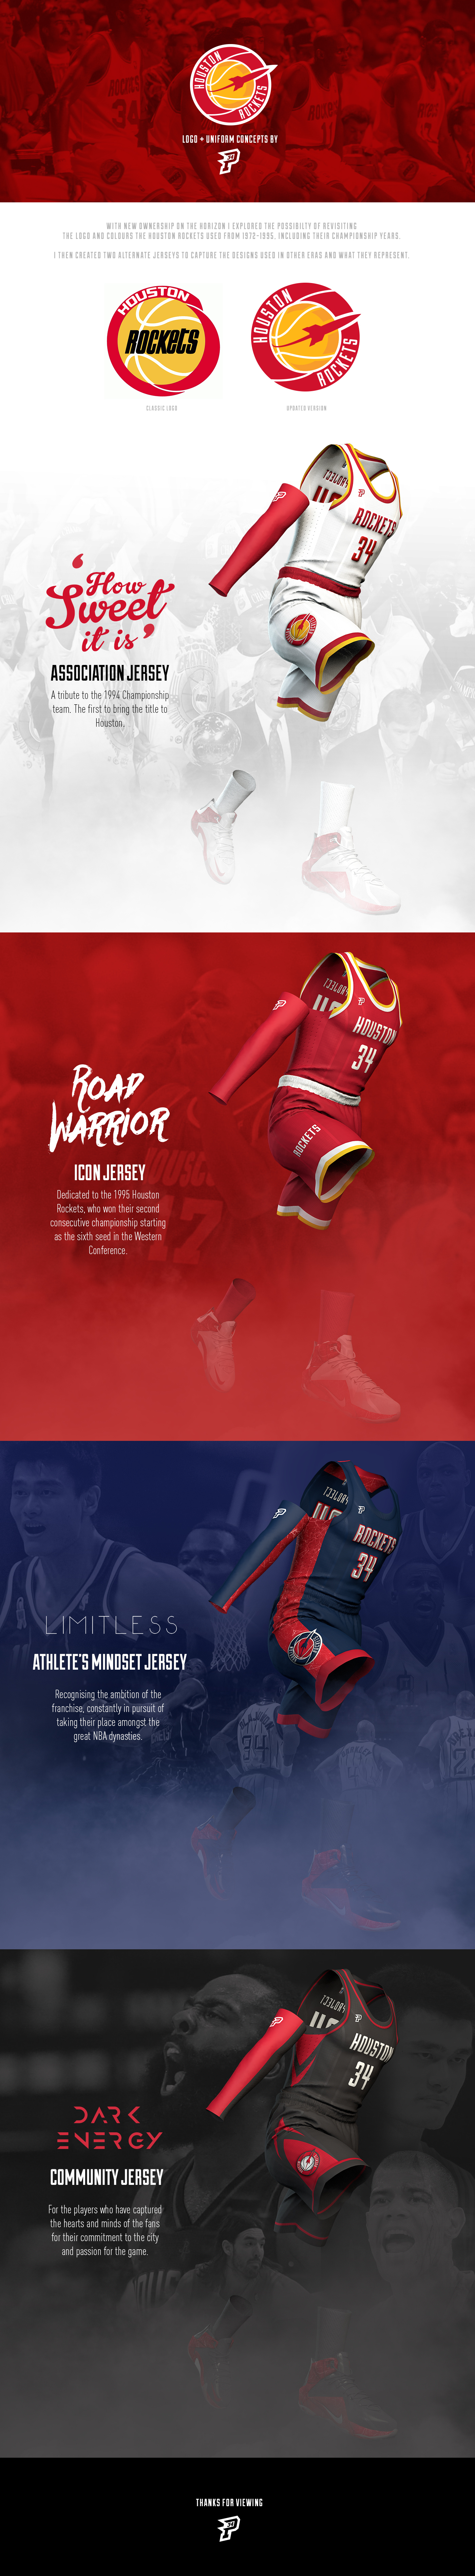 Thoughts on these Rockets concept jerseys? : r/rockets